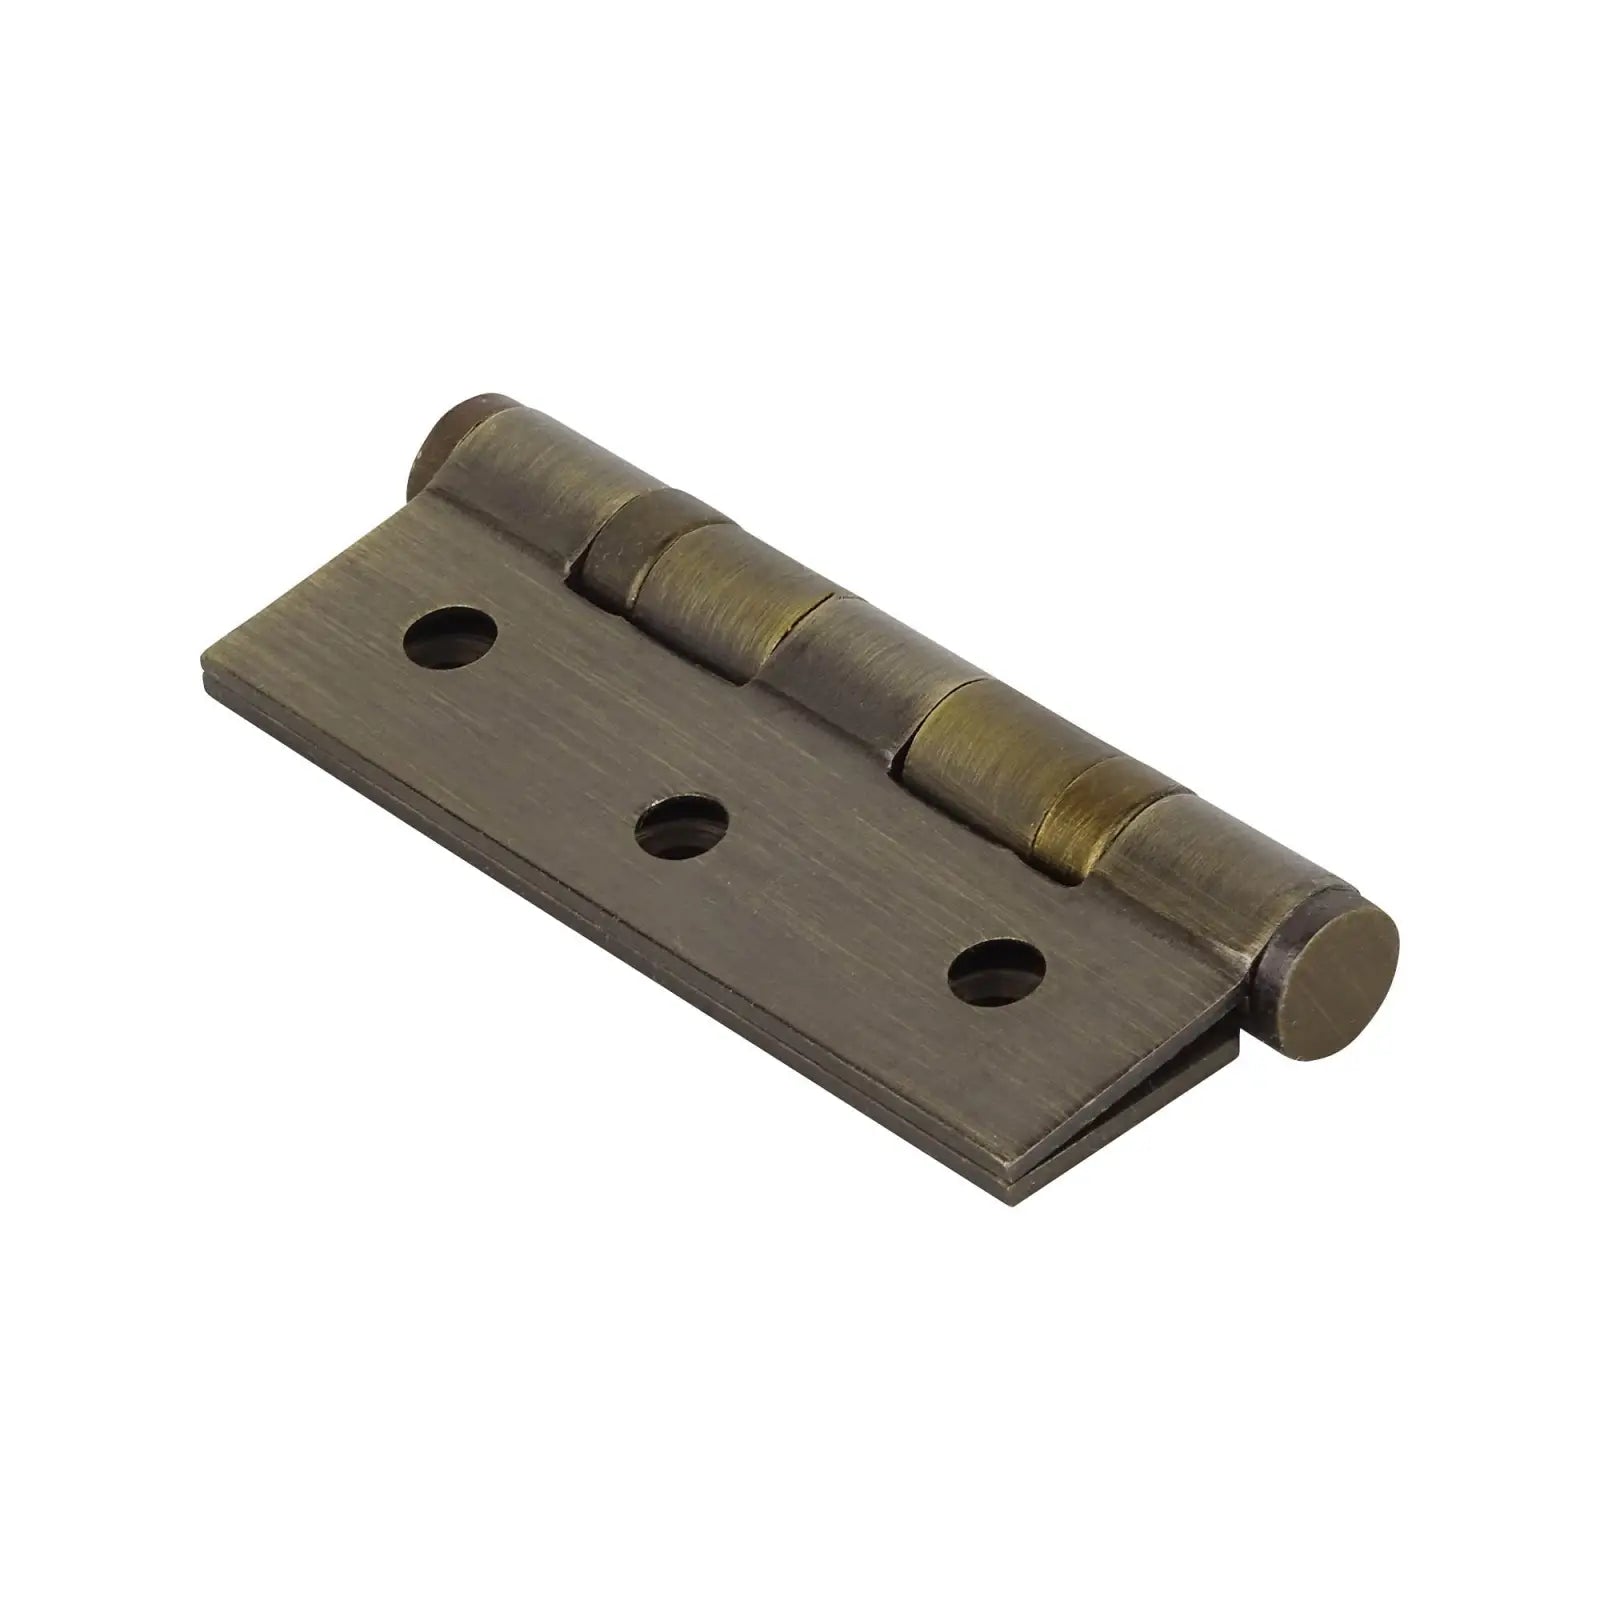 Ball Bearing Fire Rated Door Hinges - 76mm - Pair - Antique Brass